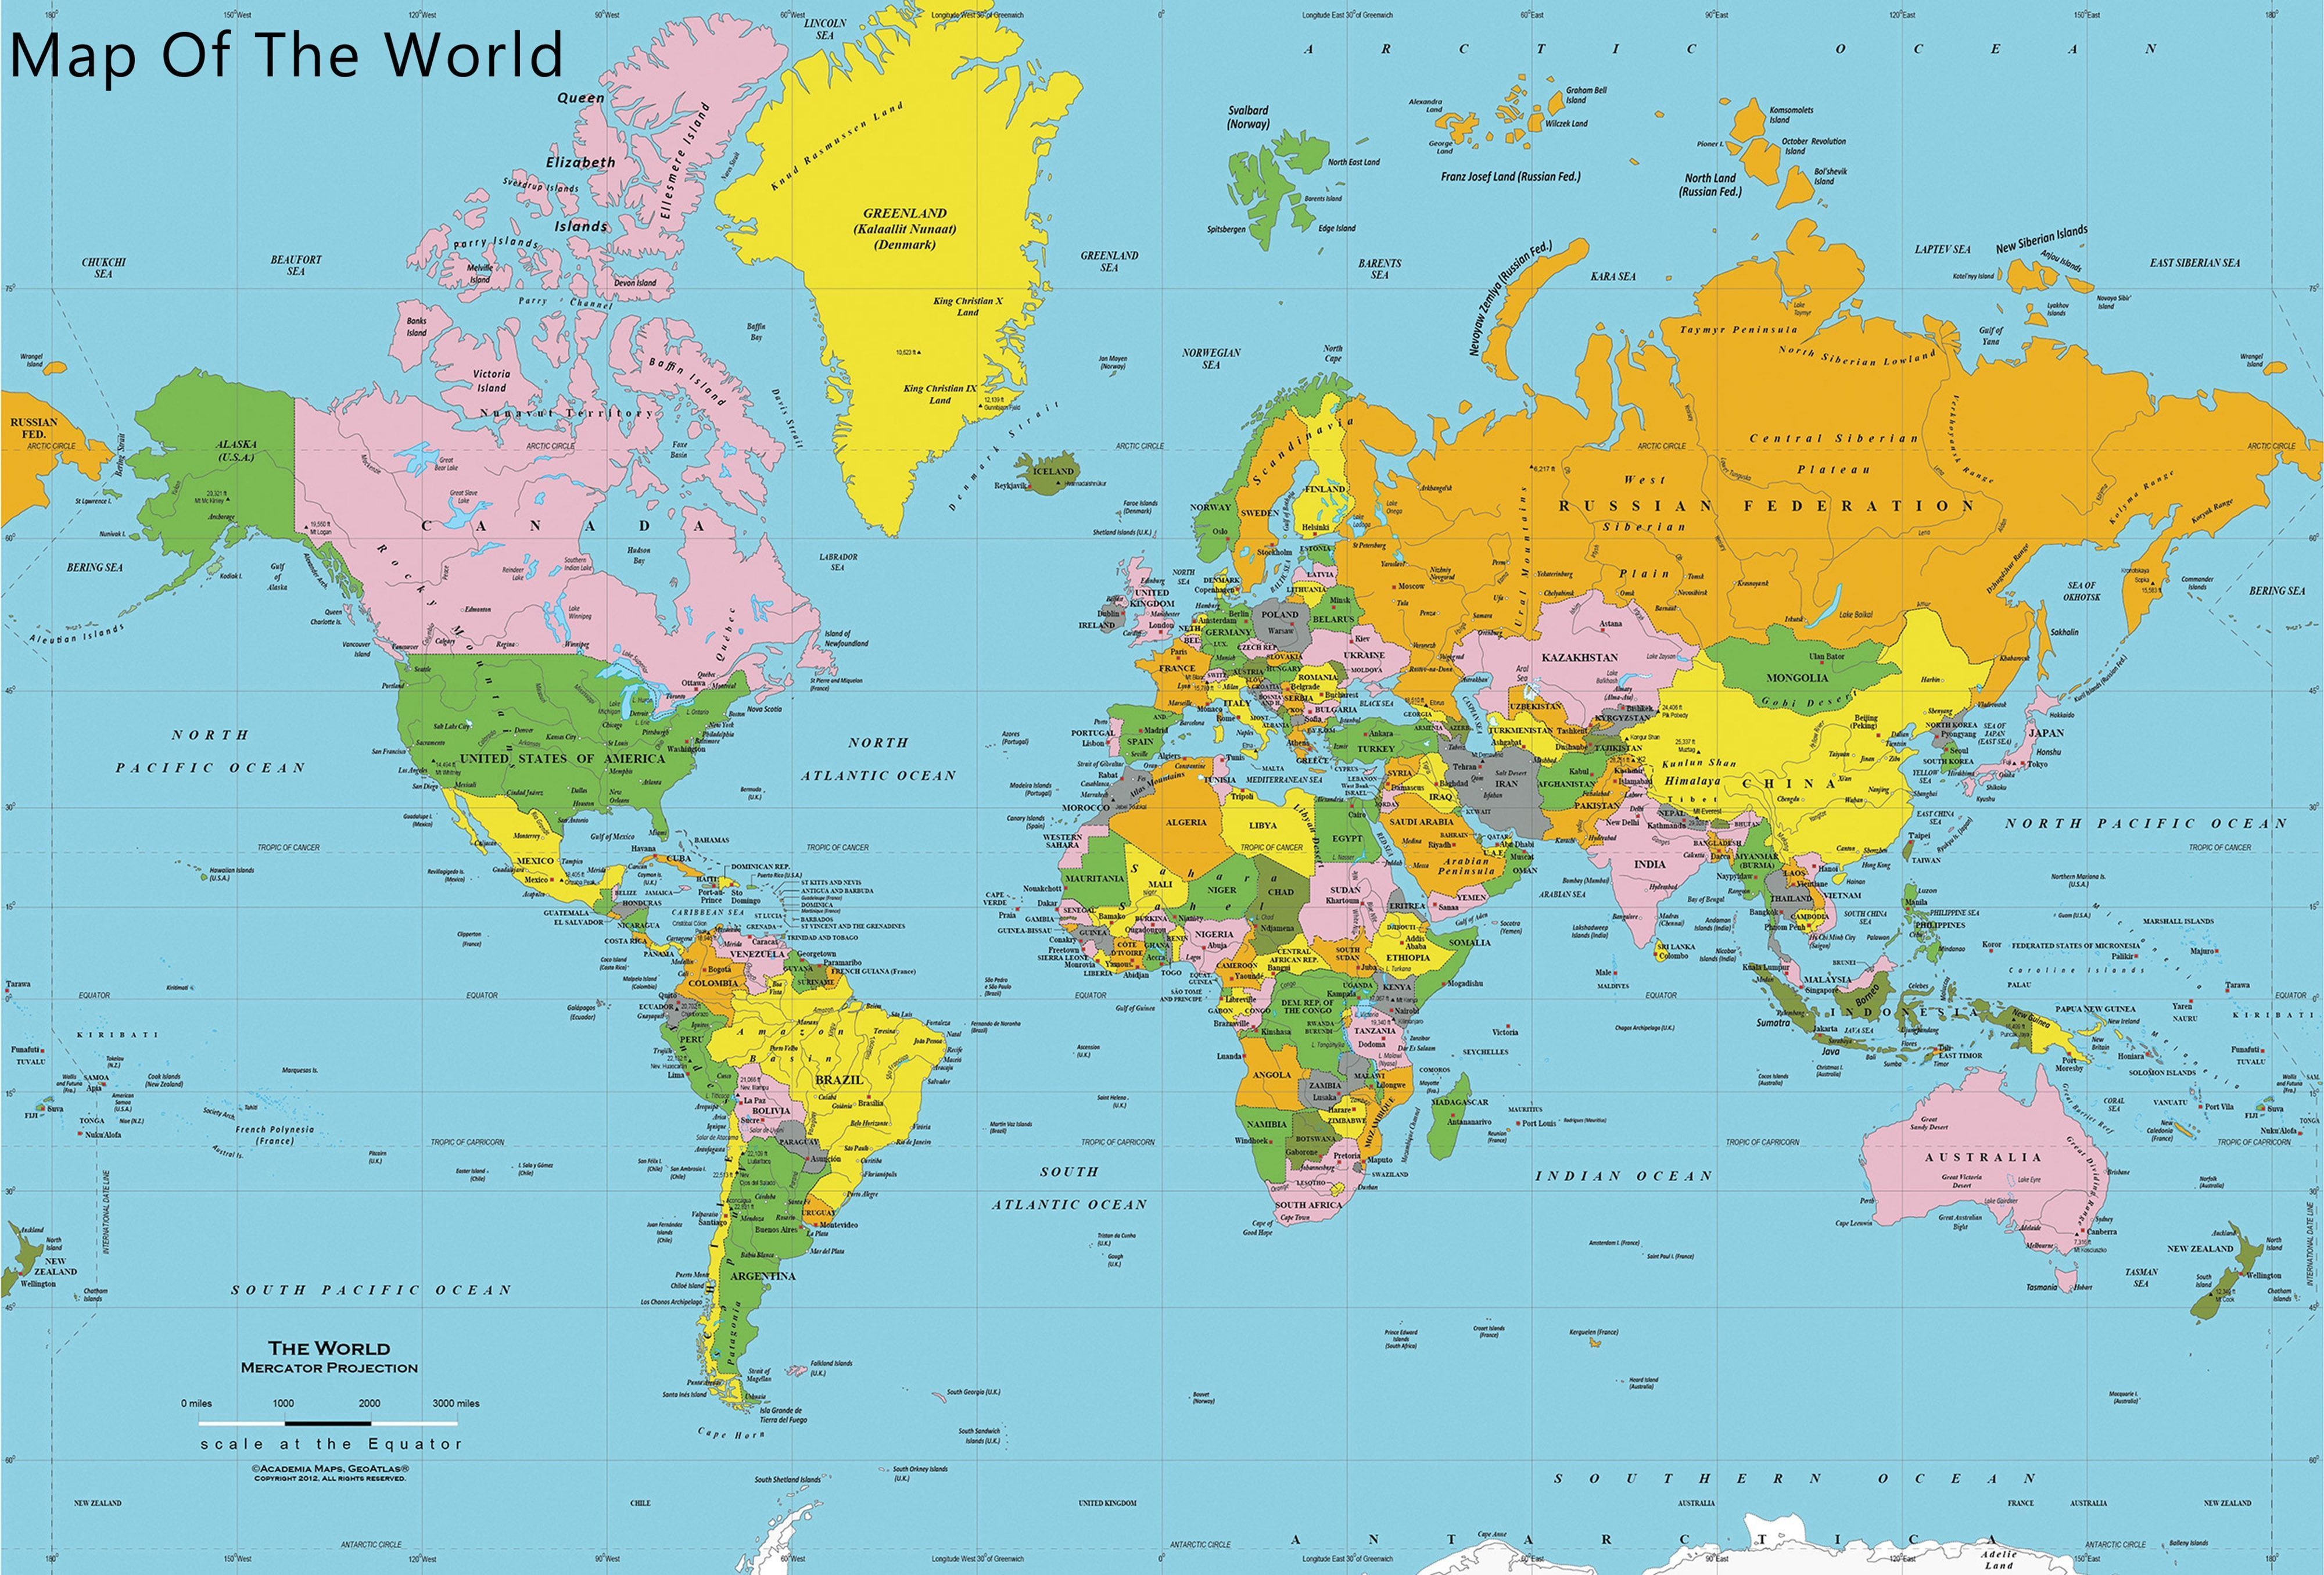 Image result for world map free. World map wallpaper, World political map, World map picture